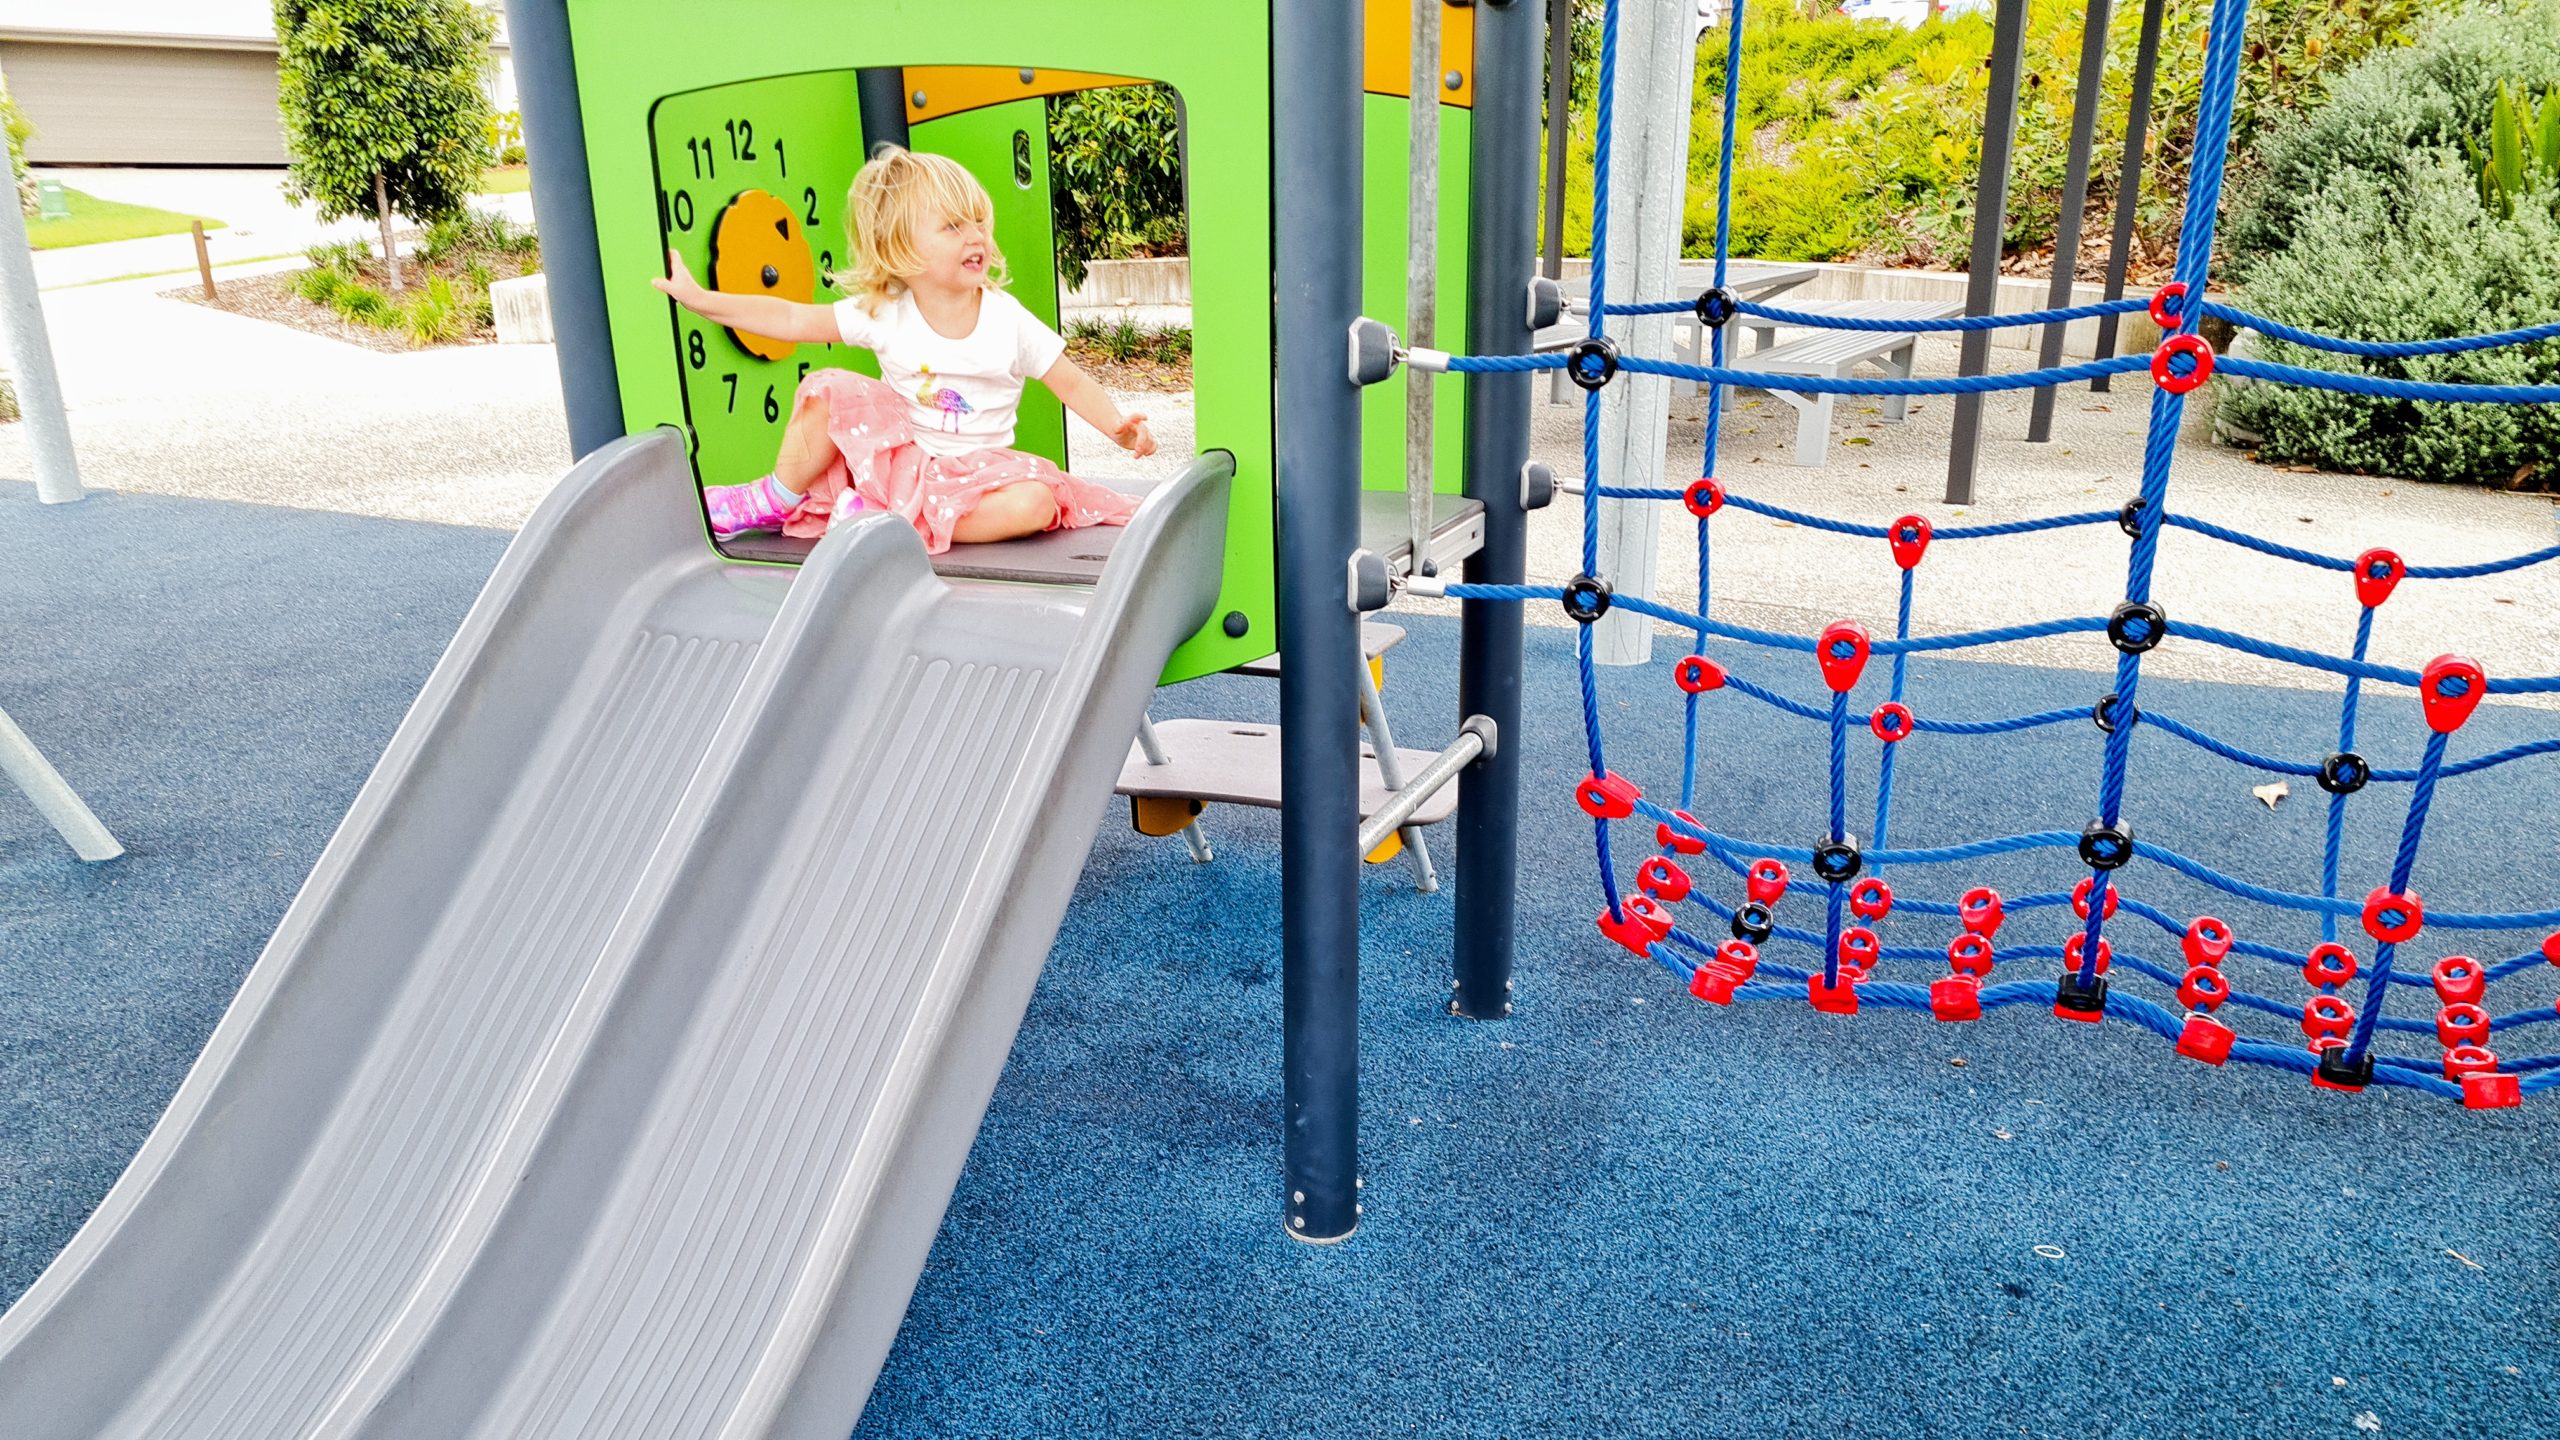 Best parks for toddlers